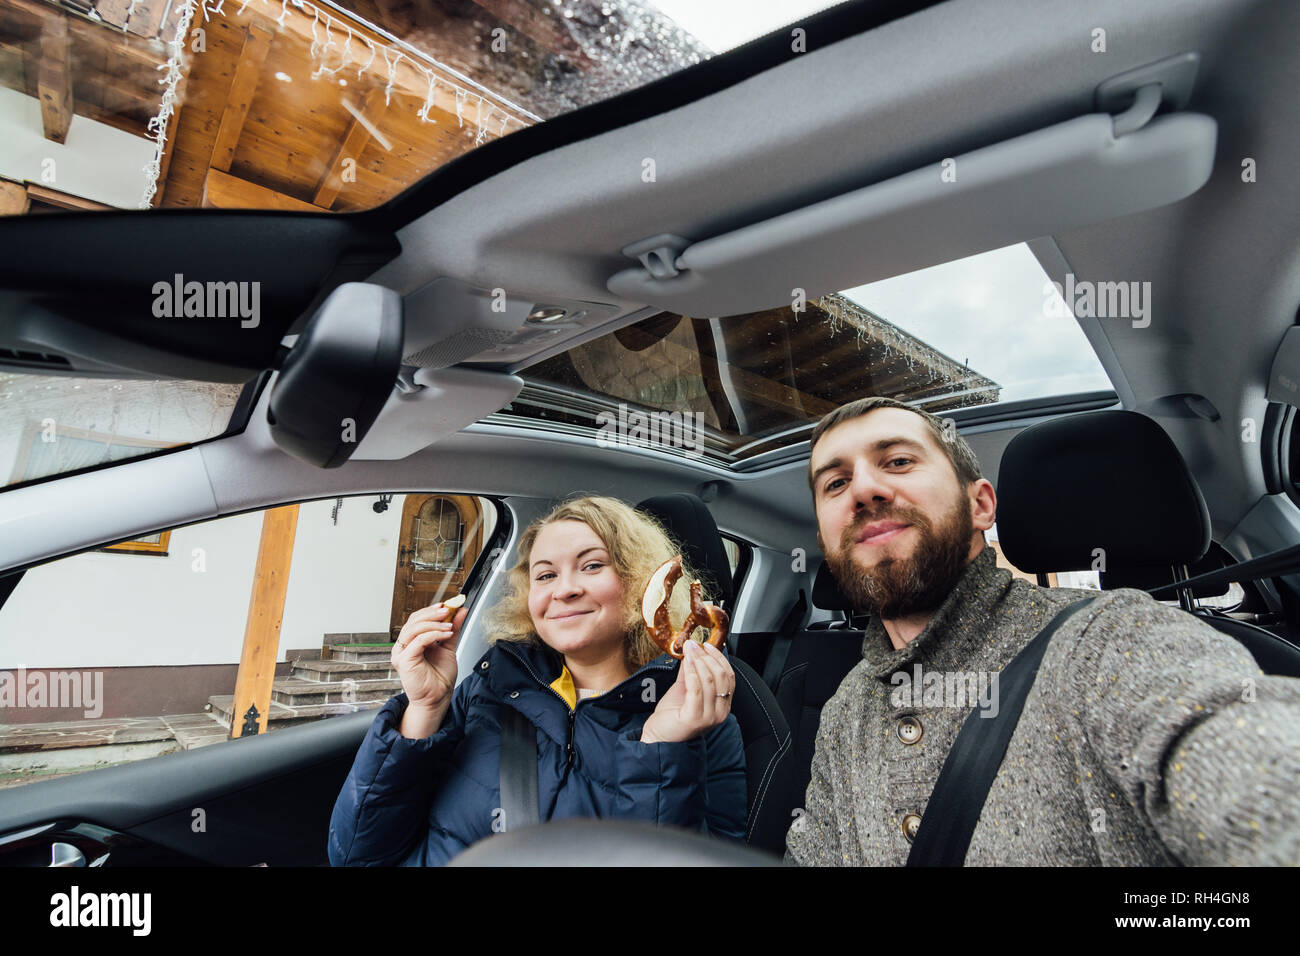 Young couple taking selfie in a car with glass roof. Wide angle lens shot. Bearded man and blonde woman smiling. Stock Photo